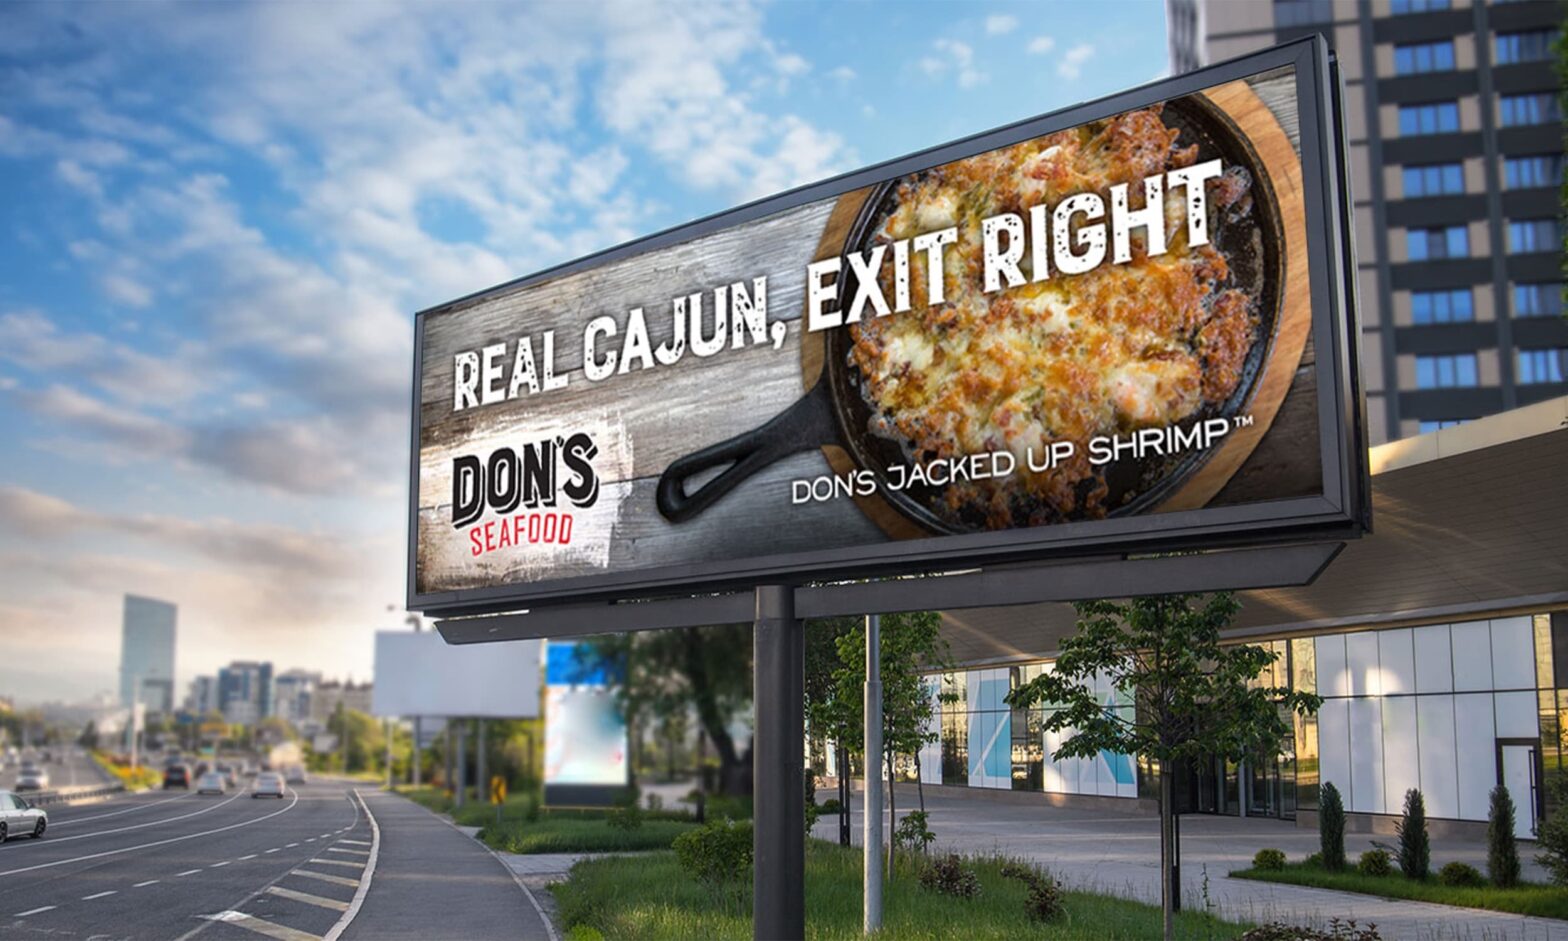 Billboard next to an interstate showing a cast iron pan filled with Don's Jacked Up Shrimp, captioned "Real Cajun, exit right".